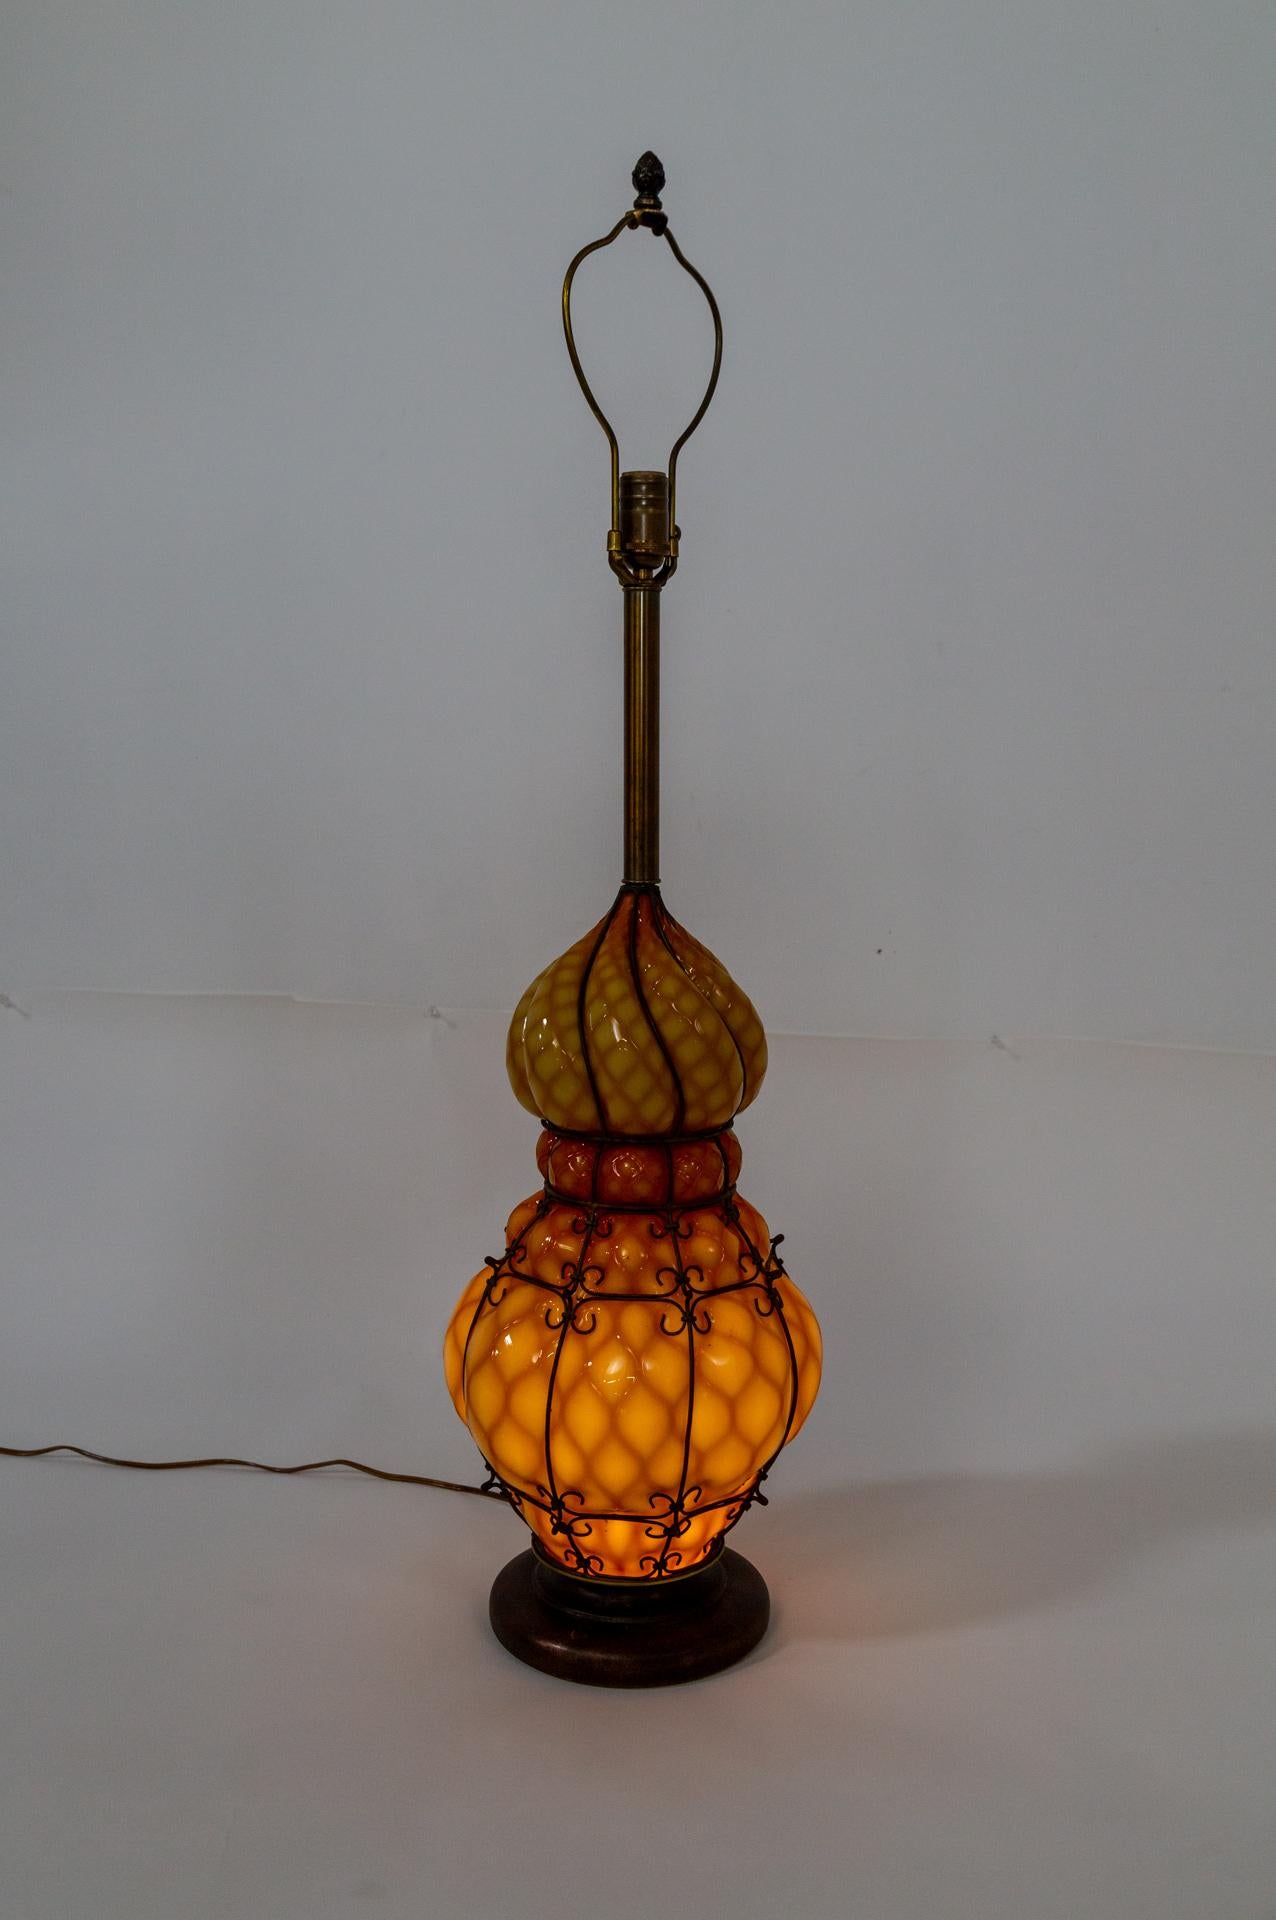 A Murano glass lamp by Marbro with a rare, 